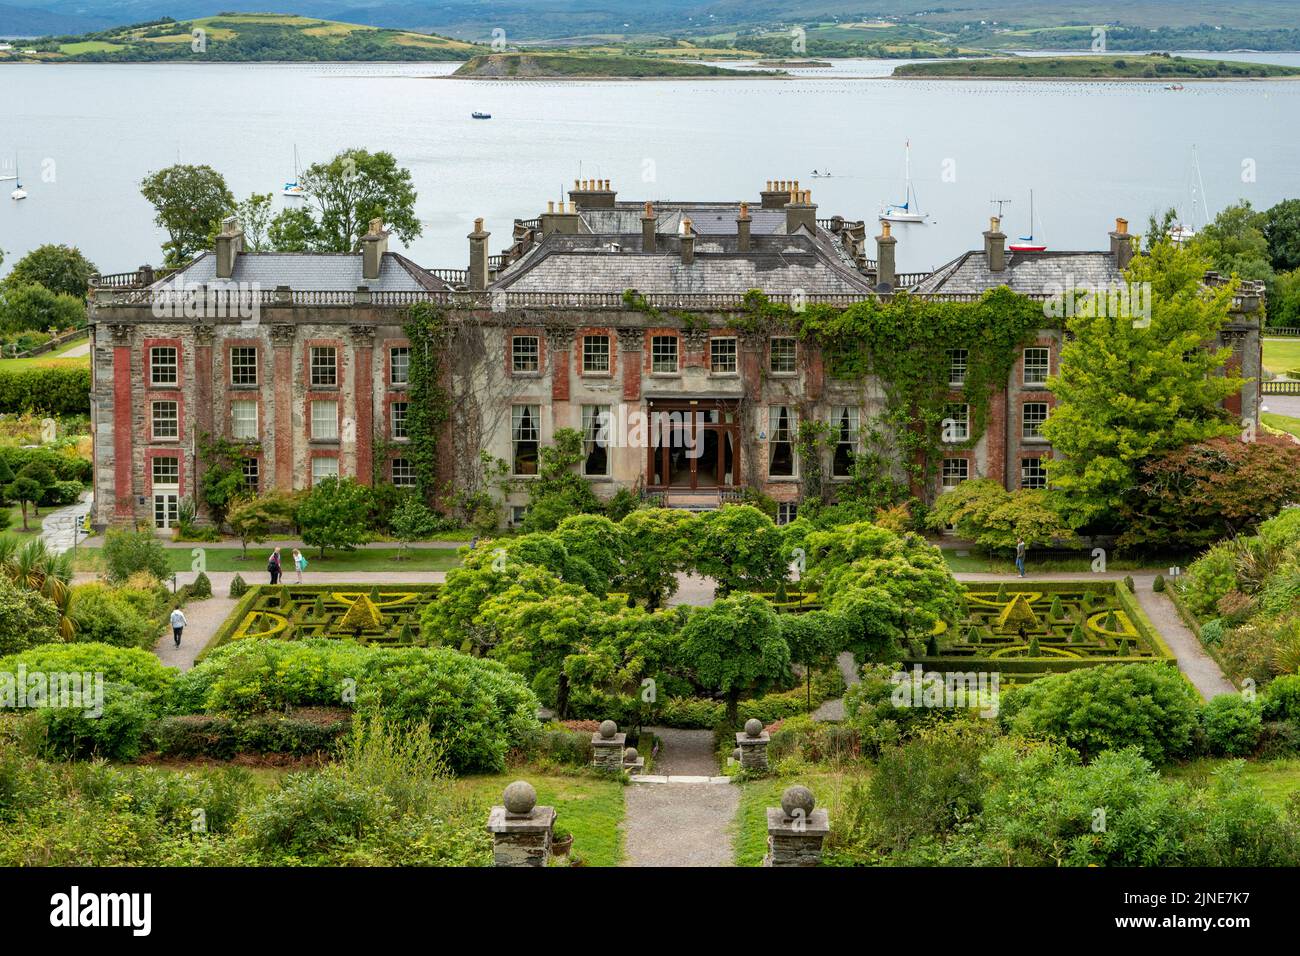 Bantry House and Gardens, Bantry, Co. Cork, Irland Stockfoto